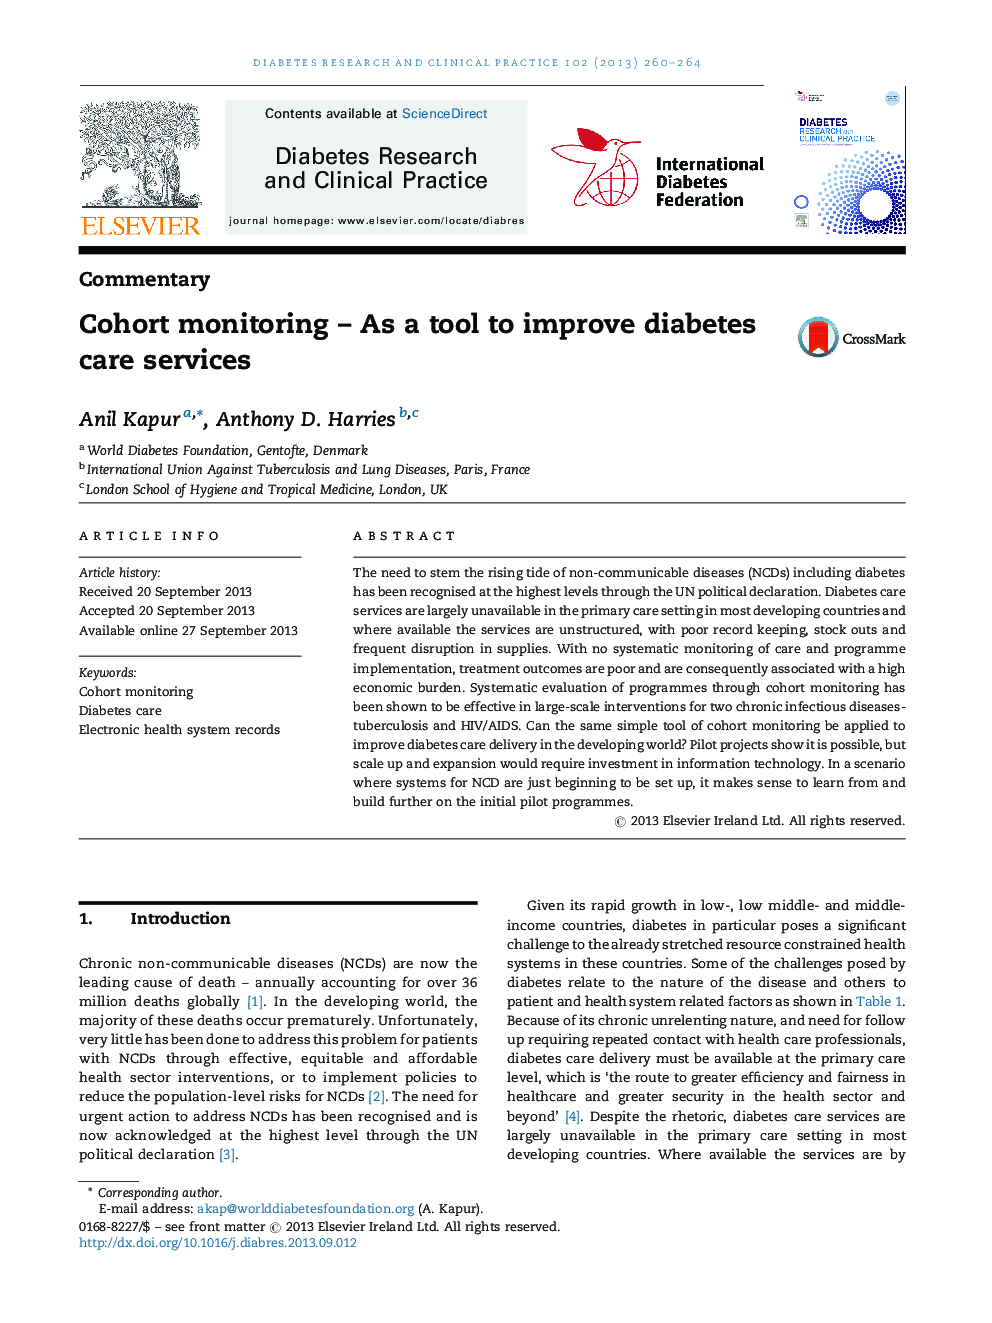 Cohort monitoring – As a tool to improve diabetes care services